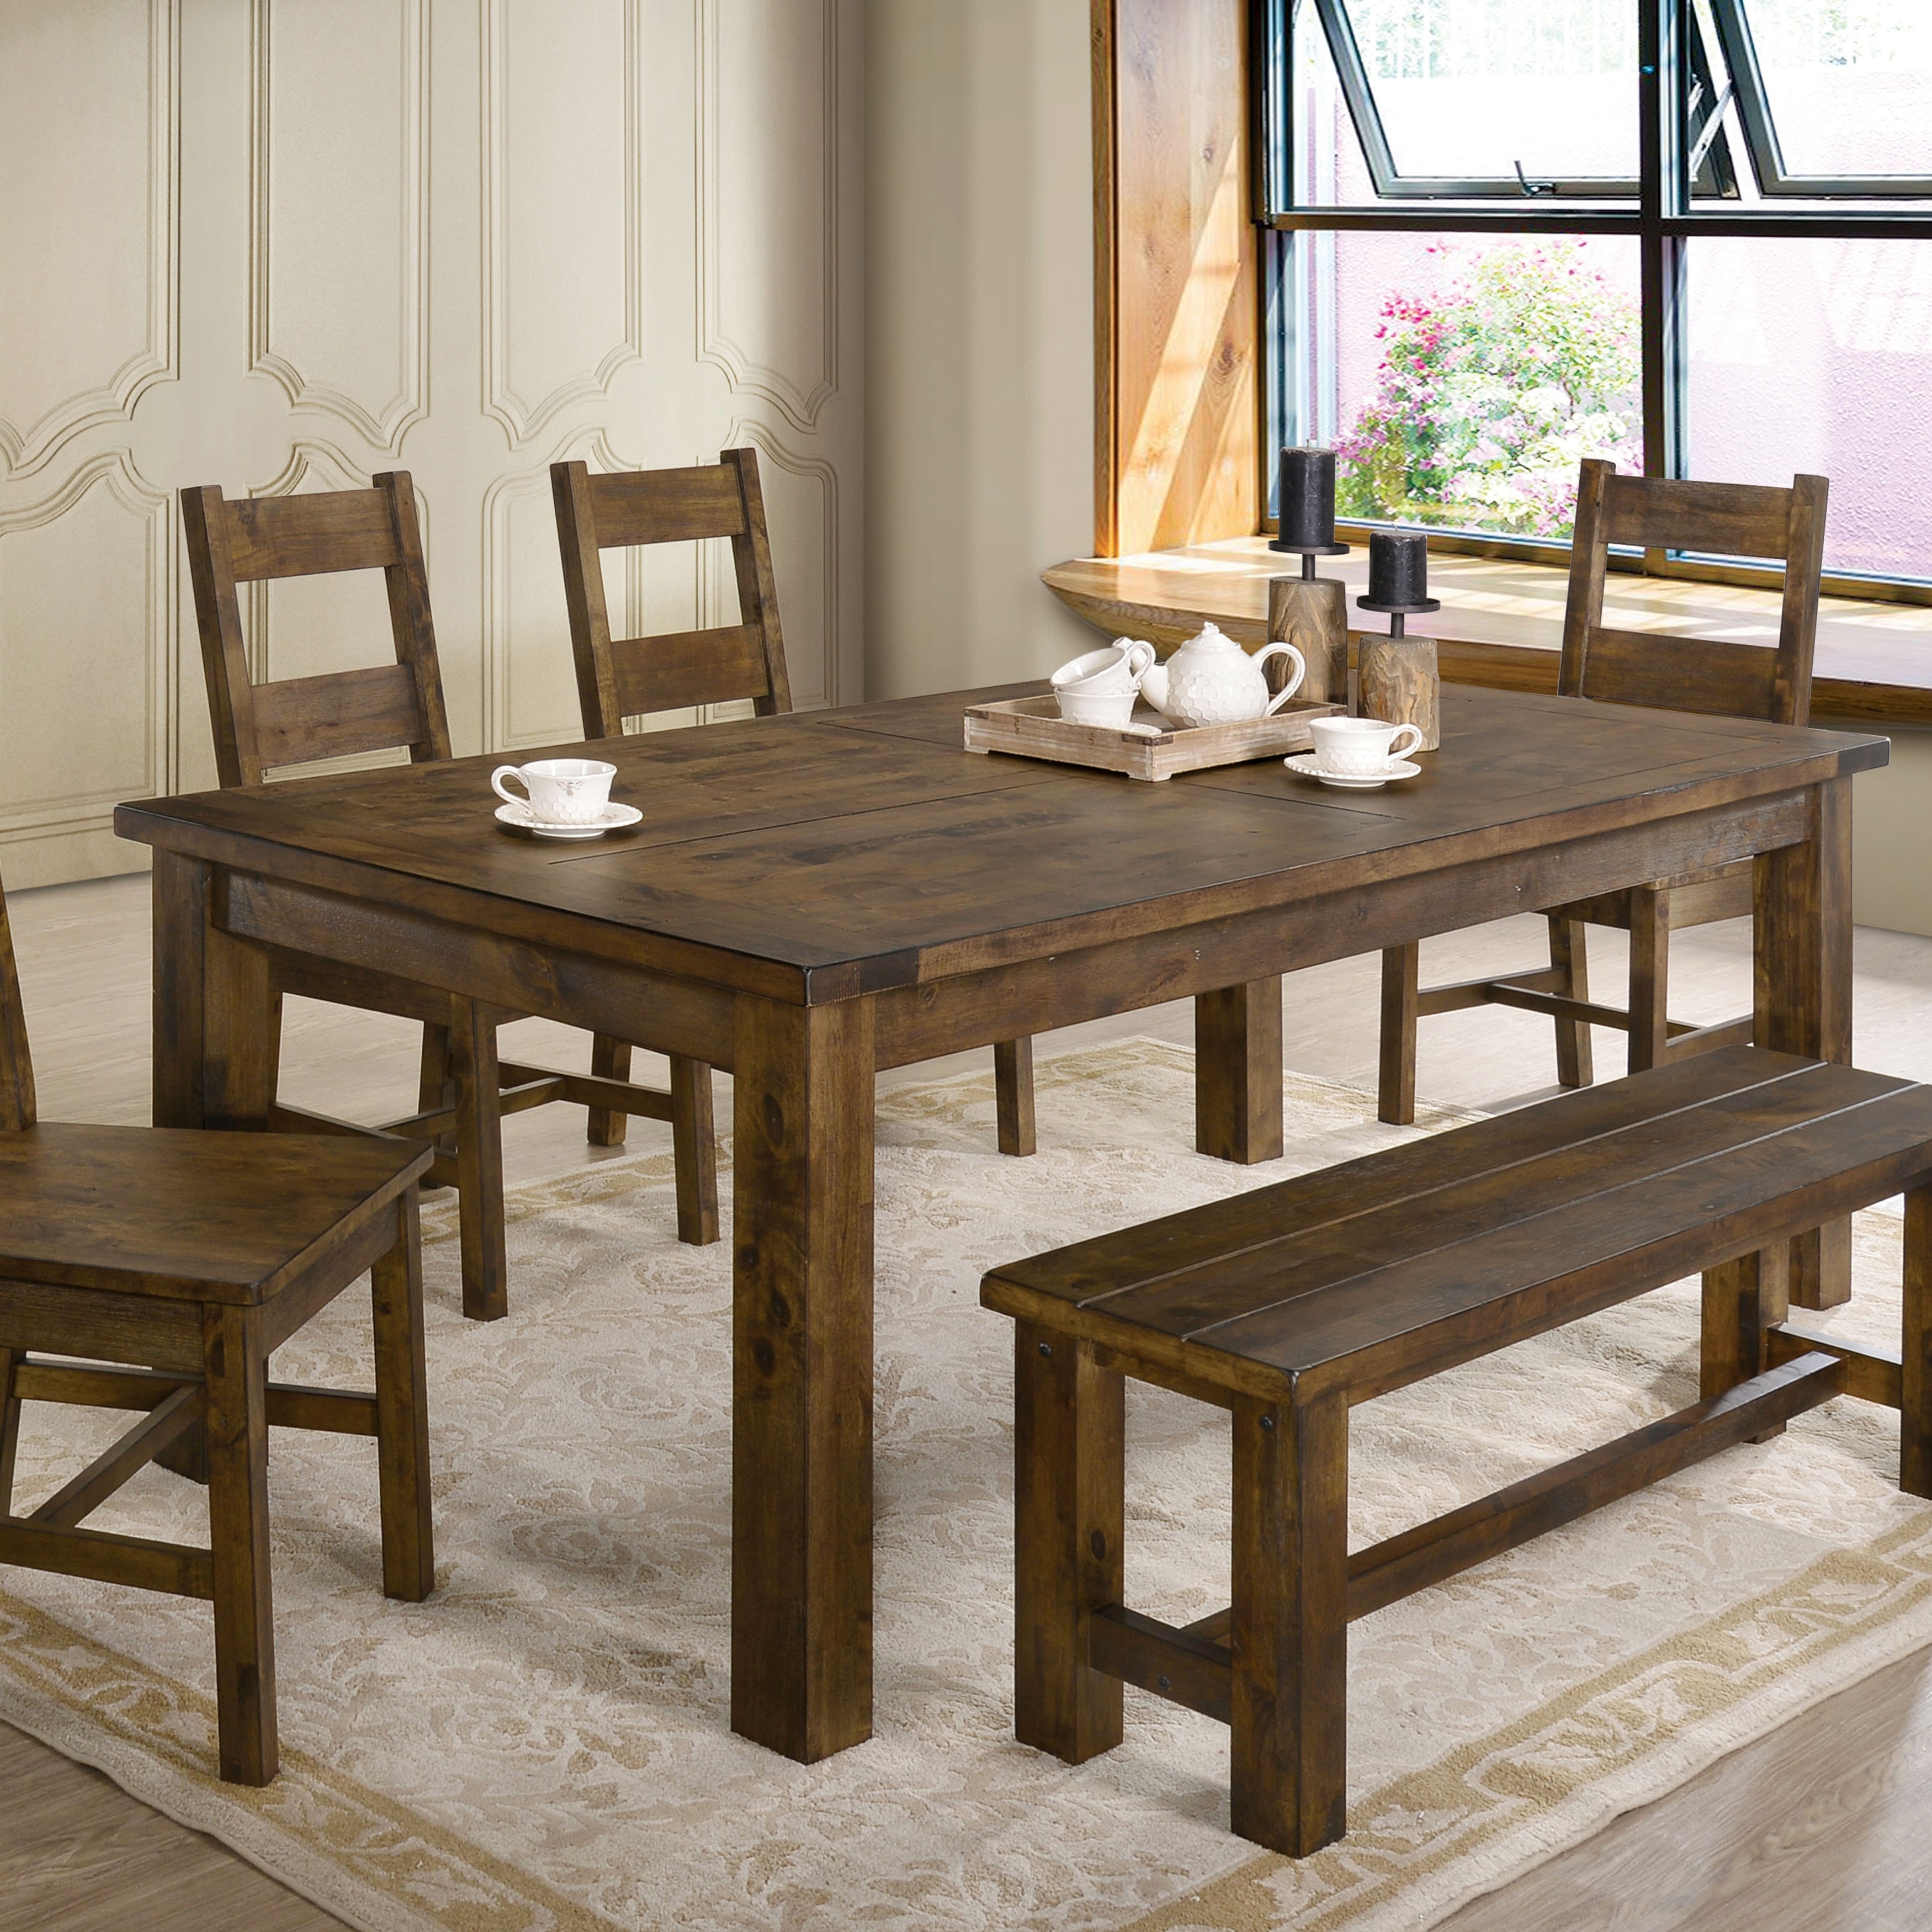 Carbon Loft Glamdring Rustic Dining Table On Sale Overstock 23570117